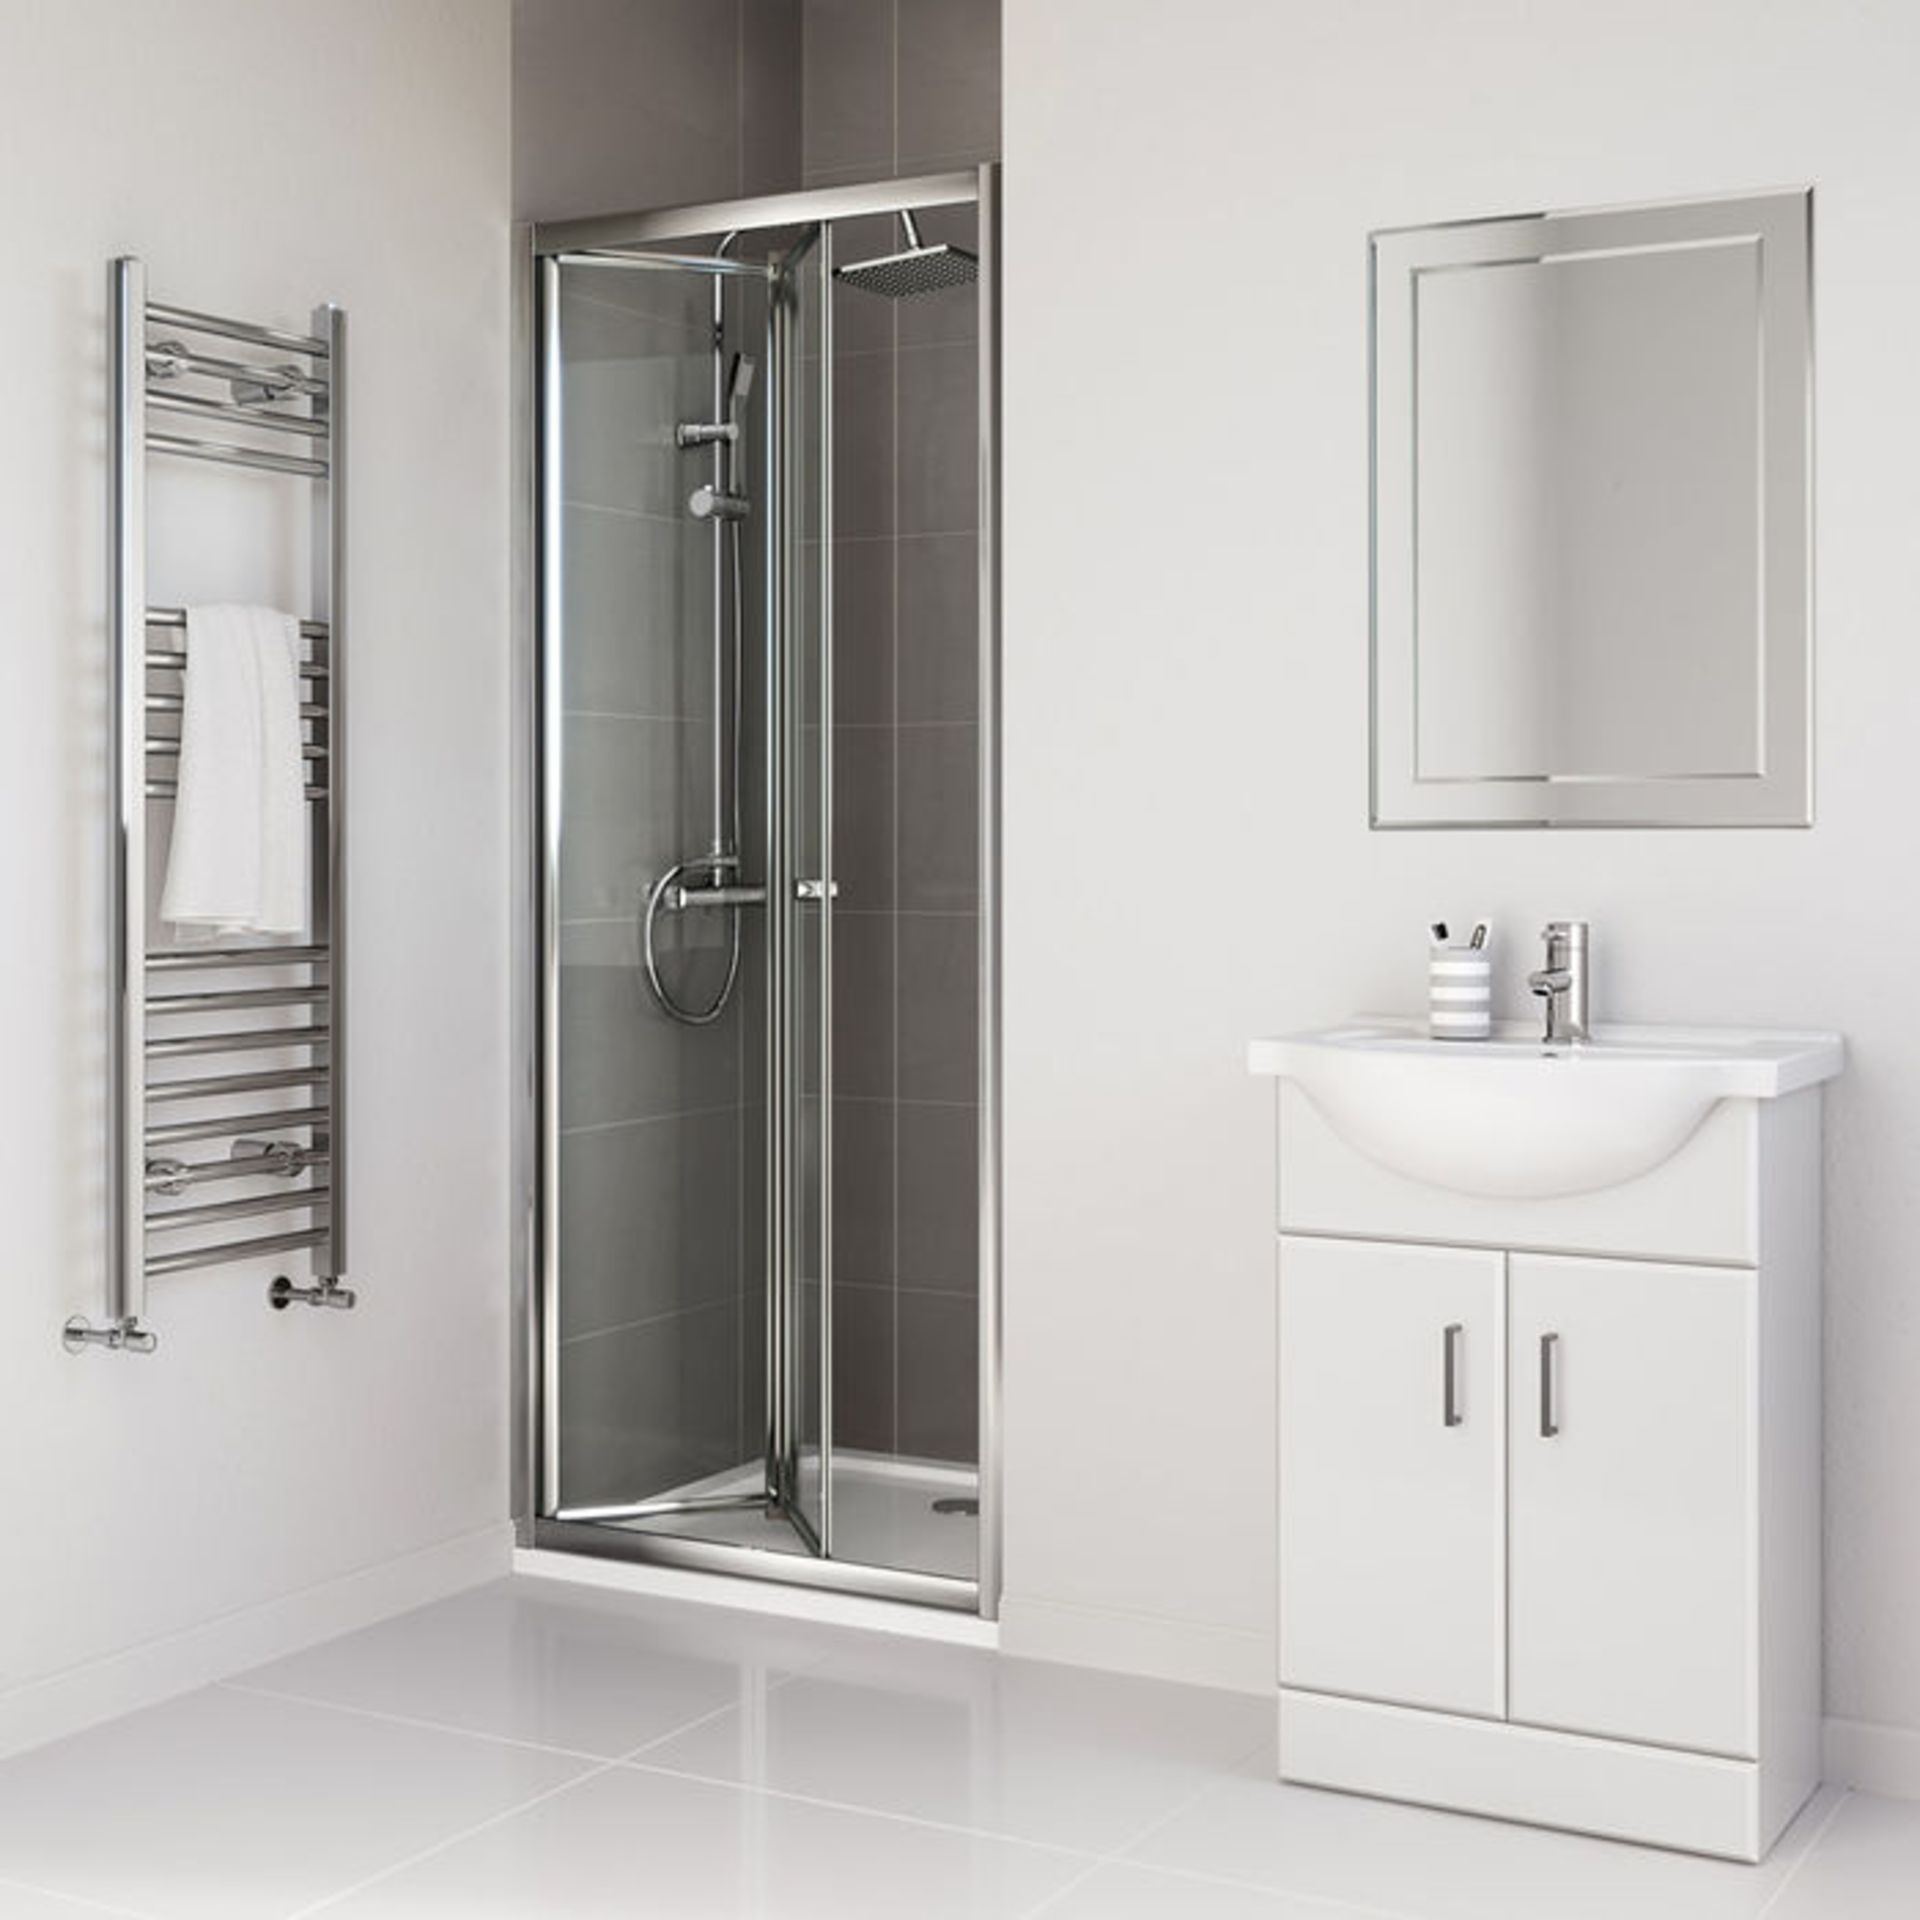 (XM12) 800mm - Elements Bi Fold Shower Door. RRP £299.99. 4mm Safety Glass Fully waterproof tested - Image 3 of 3